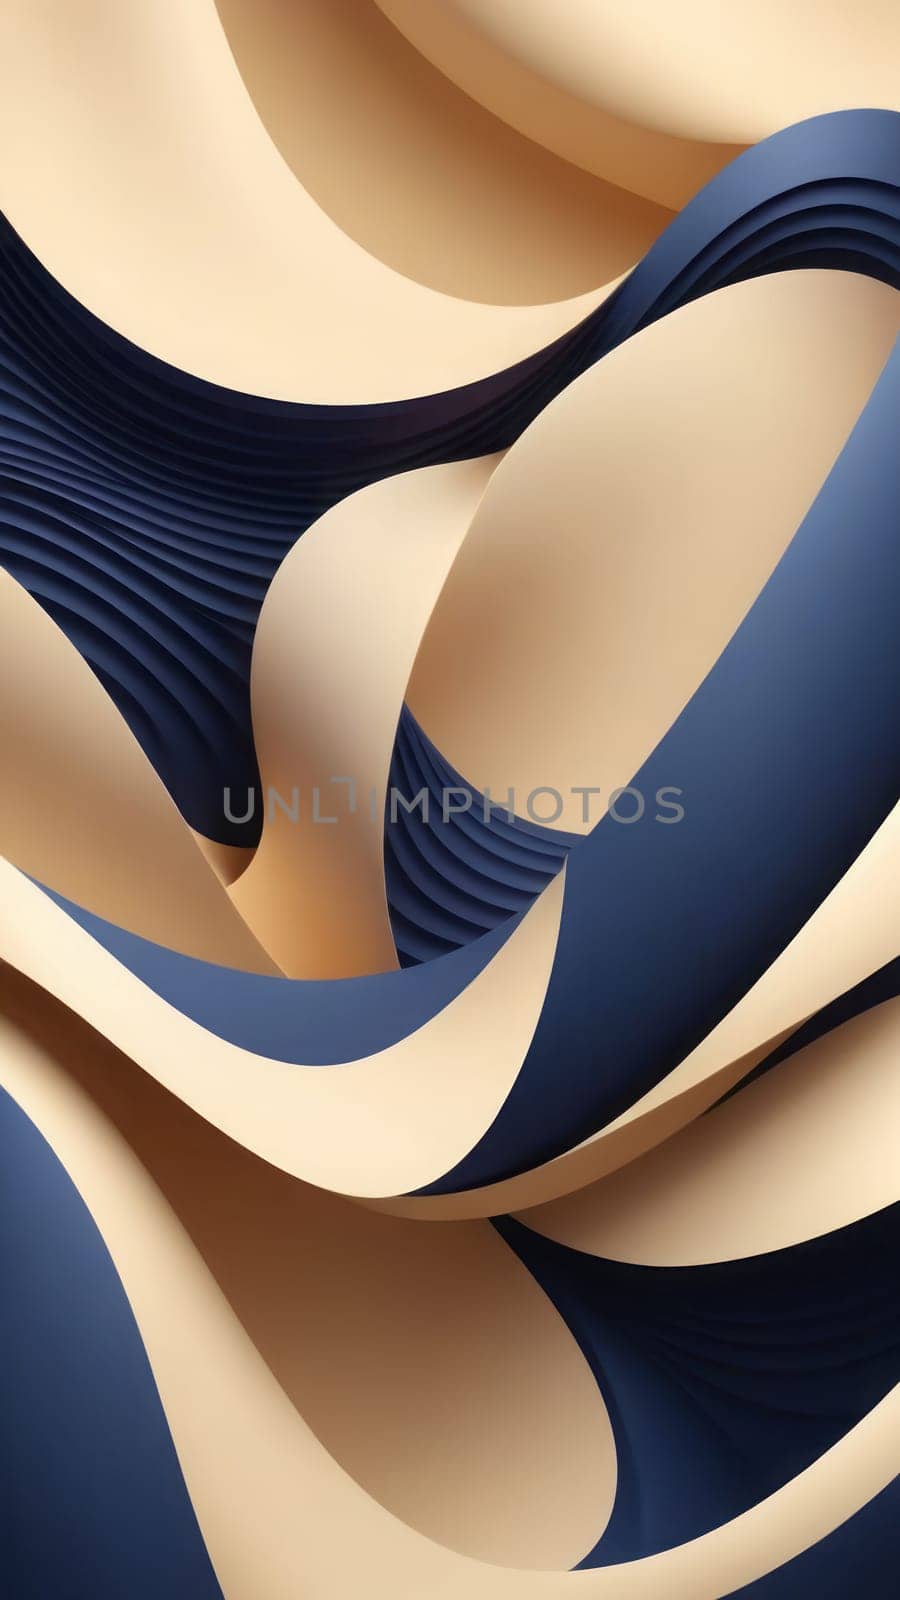 Colorful art from Waved shapes and navy by nkotlyar